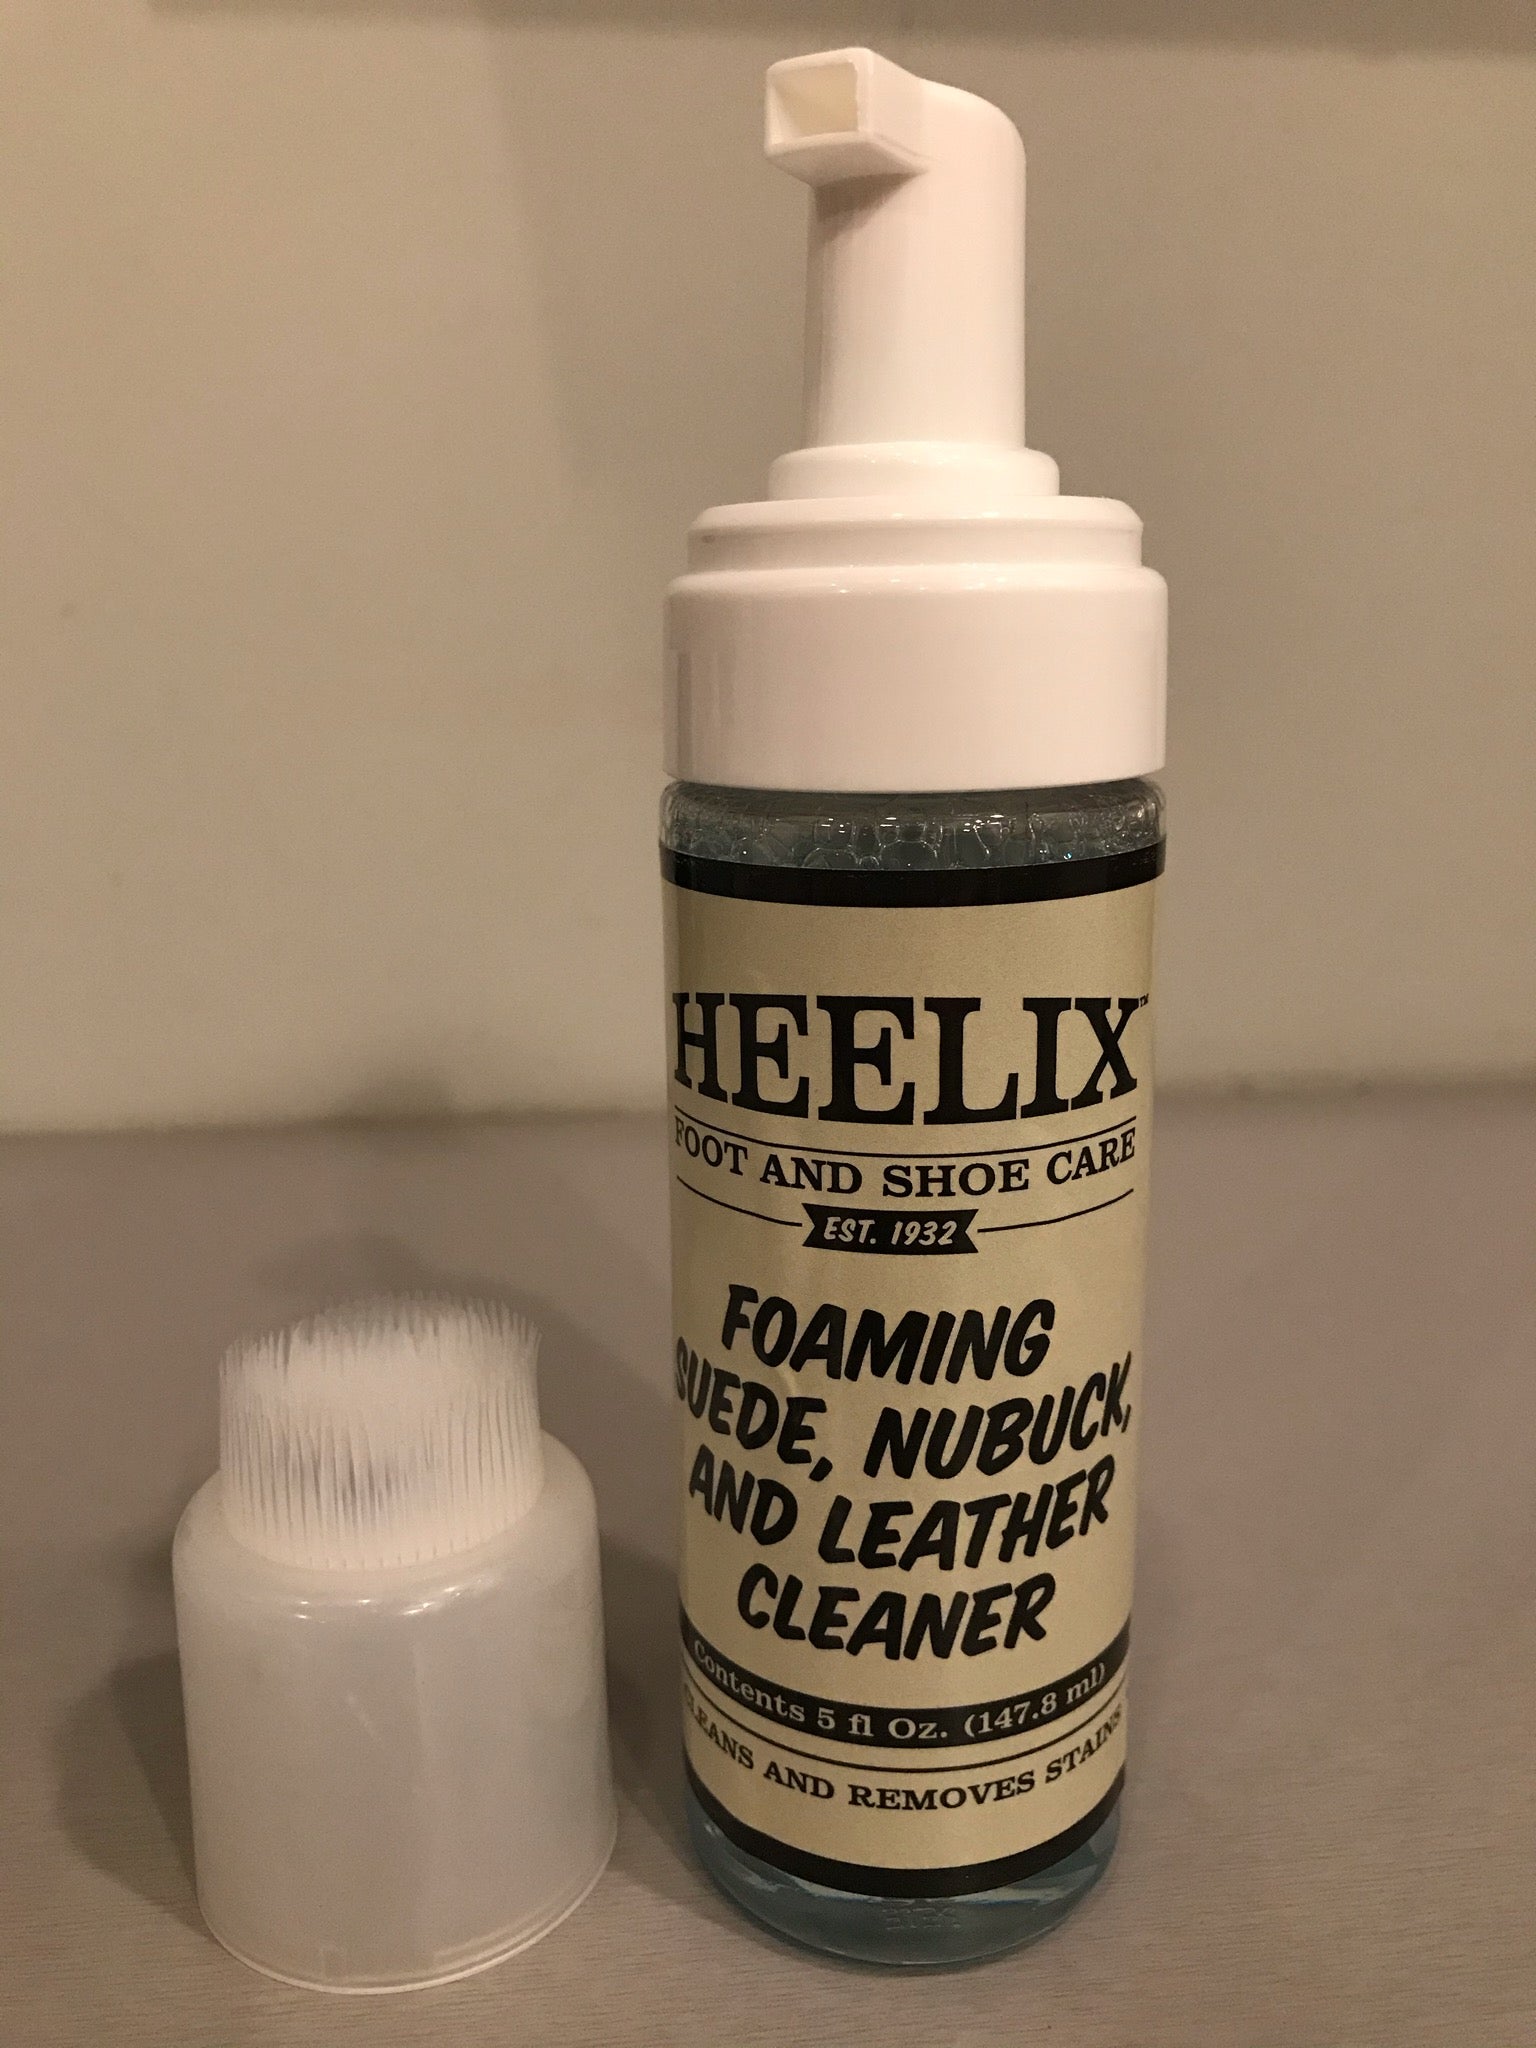 Heelix Foaming Suede, Nubuck, and Leather Cleaner